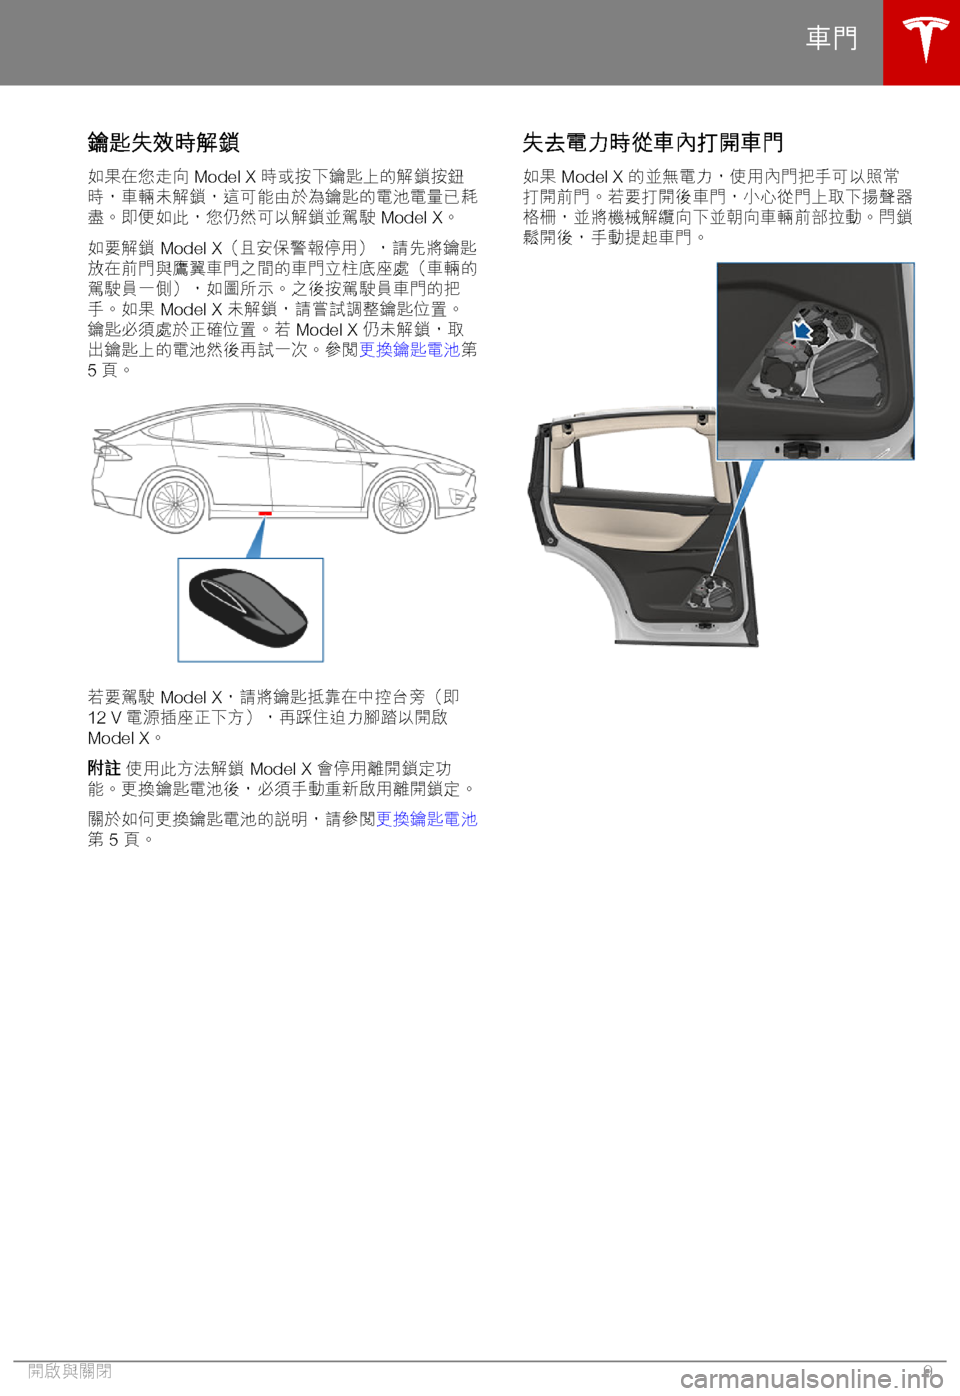 TESLA MODEL X 2018  車主手冊 (in Chinese Traditional) 6k)9"O